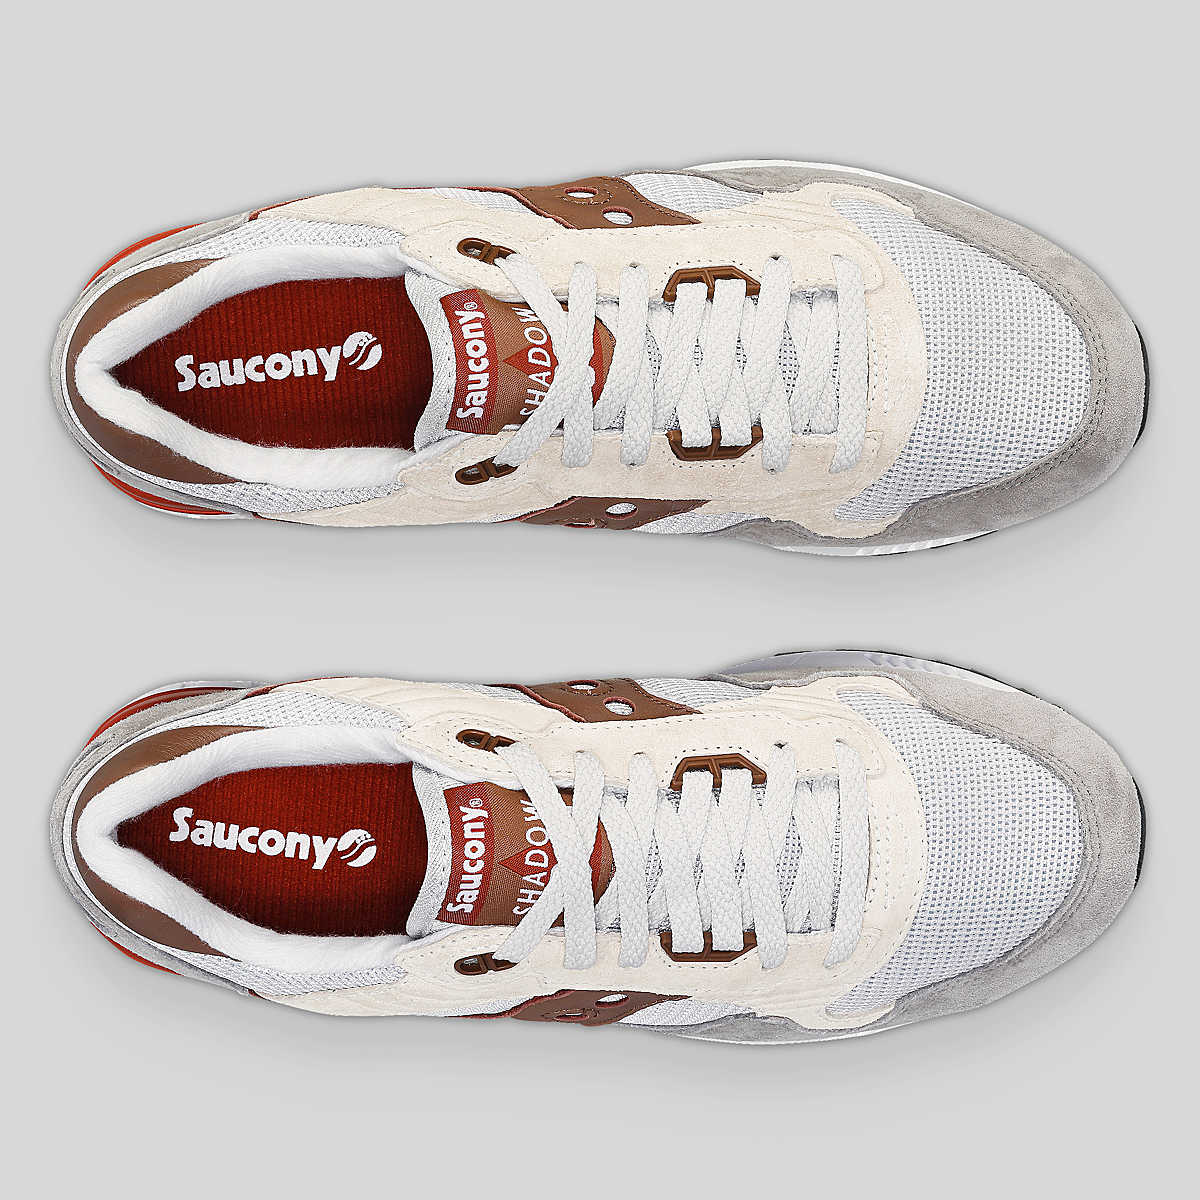 Saucony Tennis Shoes - Shadow 5000 - Grey / Brown